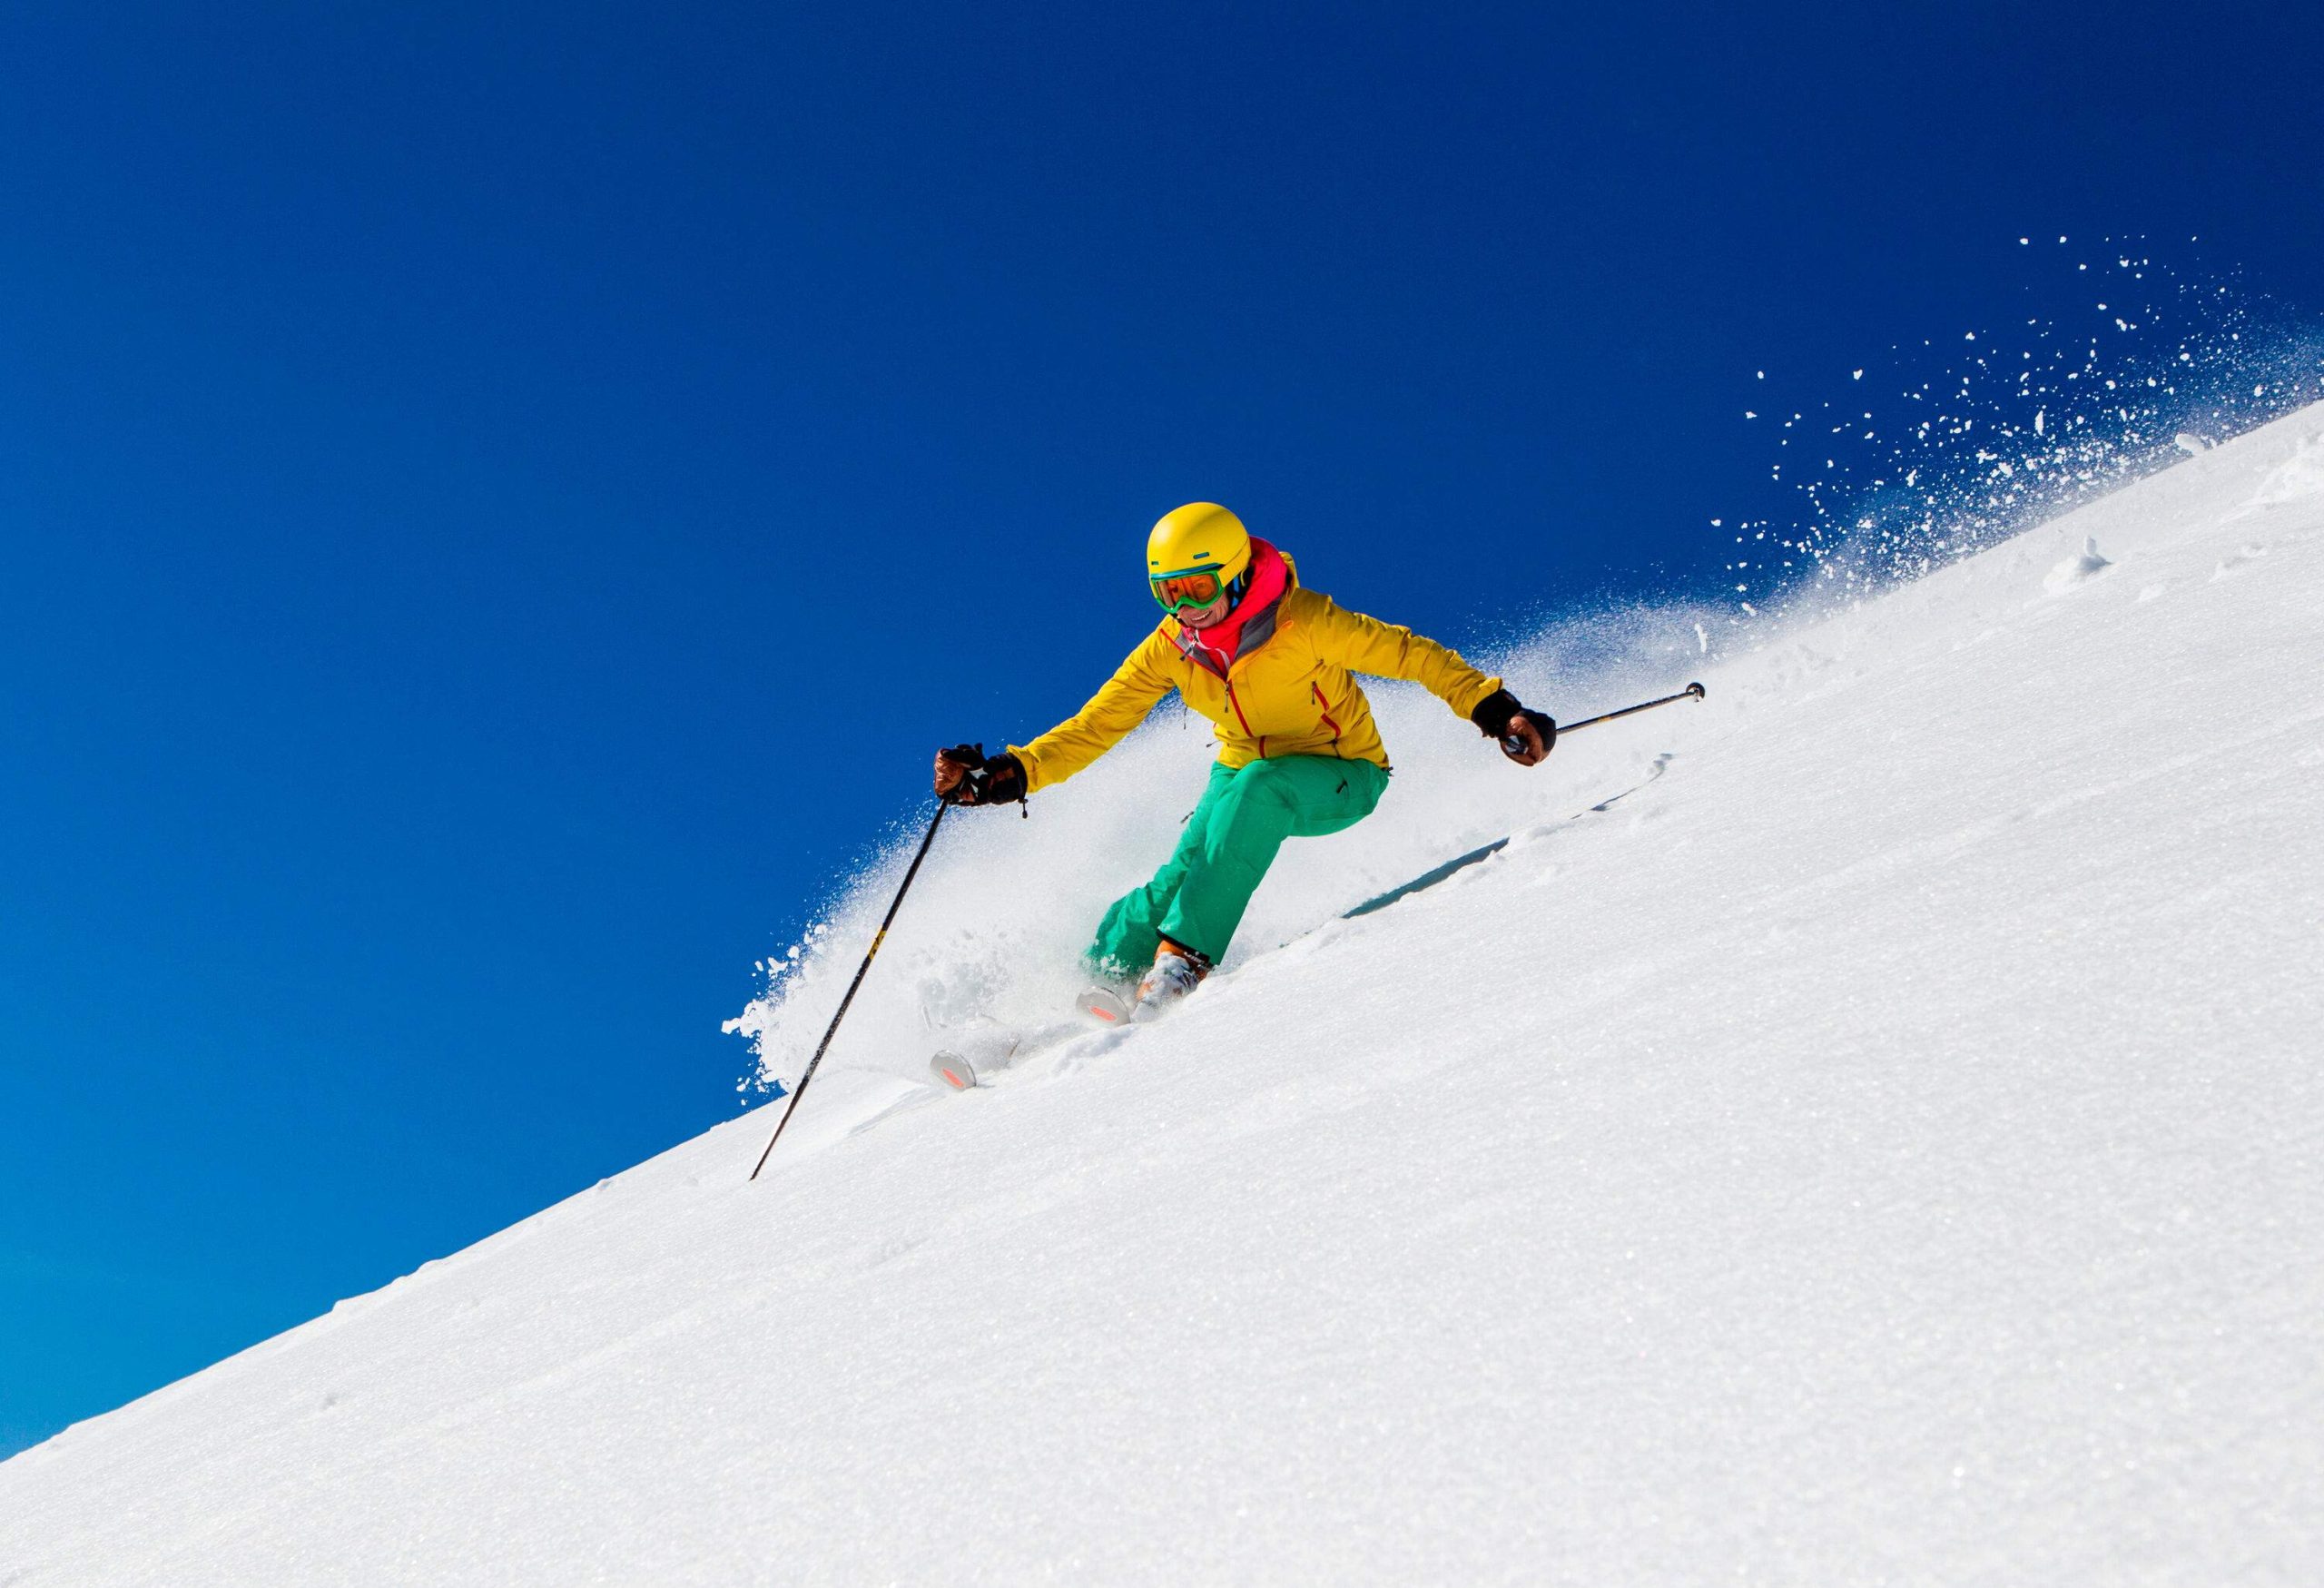 A female skier slides down a snow-covered hill with a background of a cloudless blue sky.